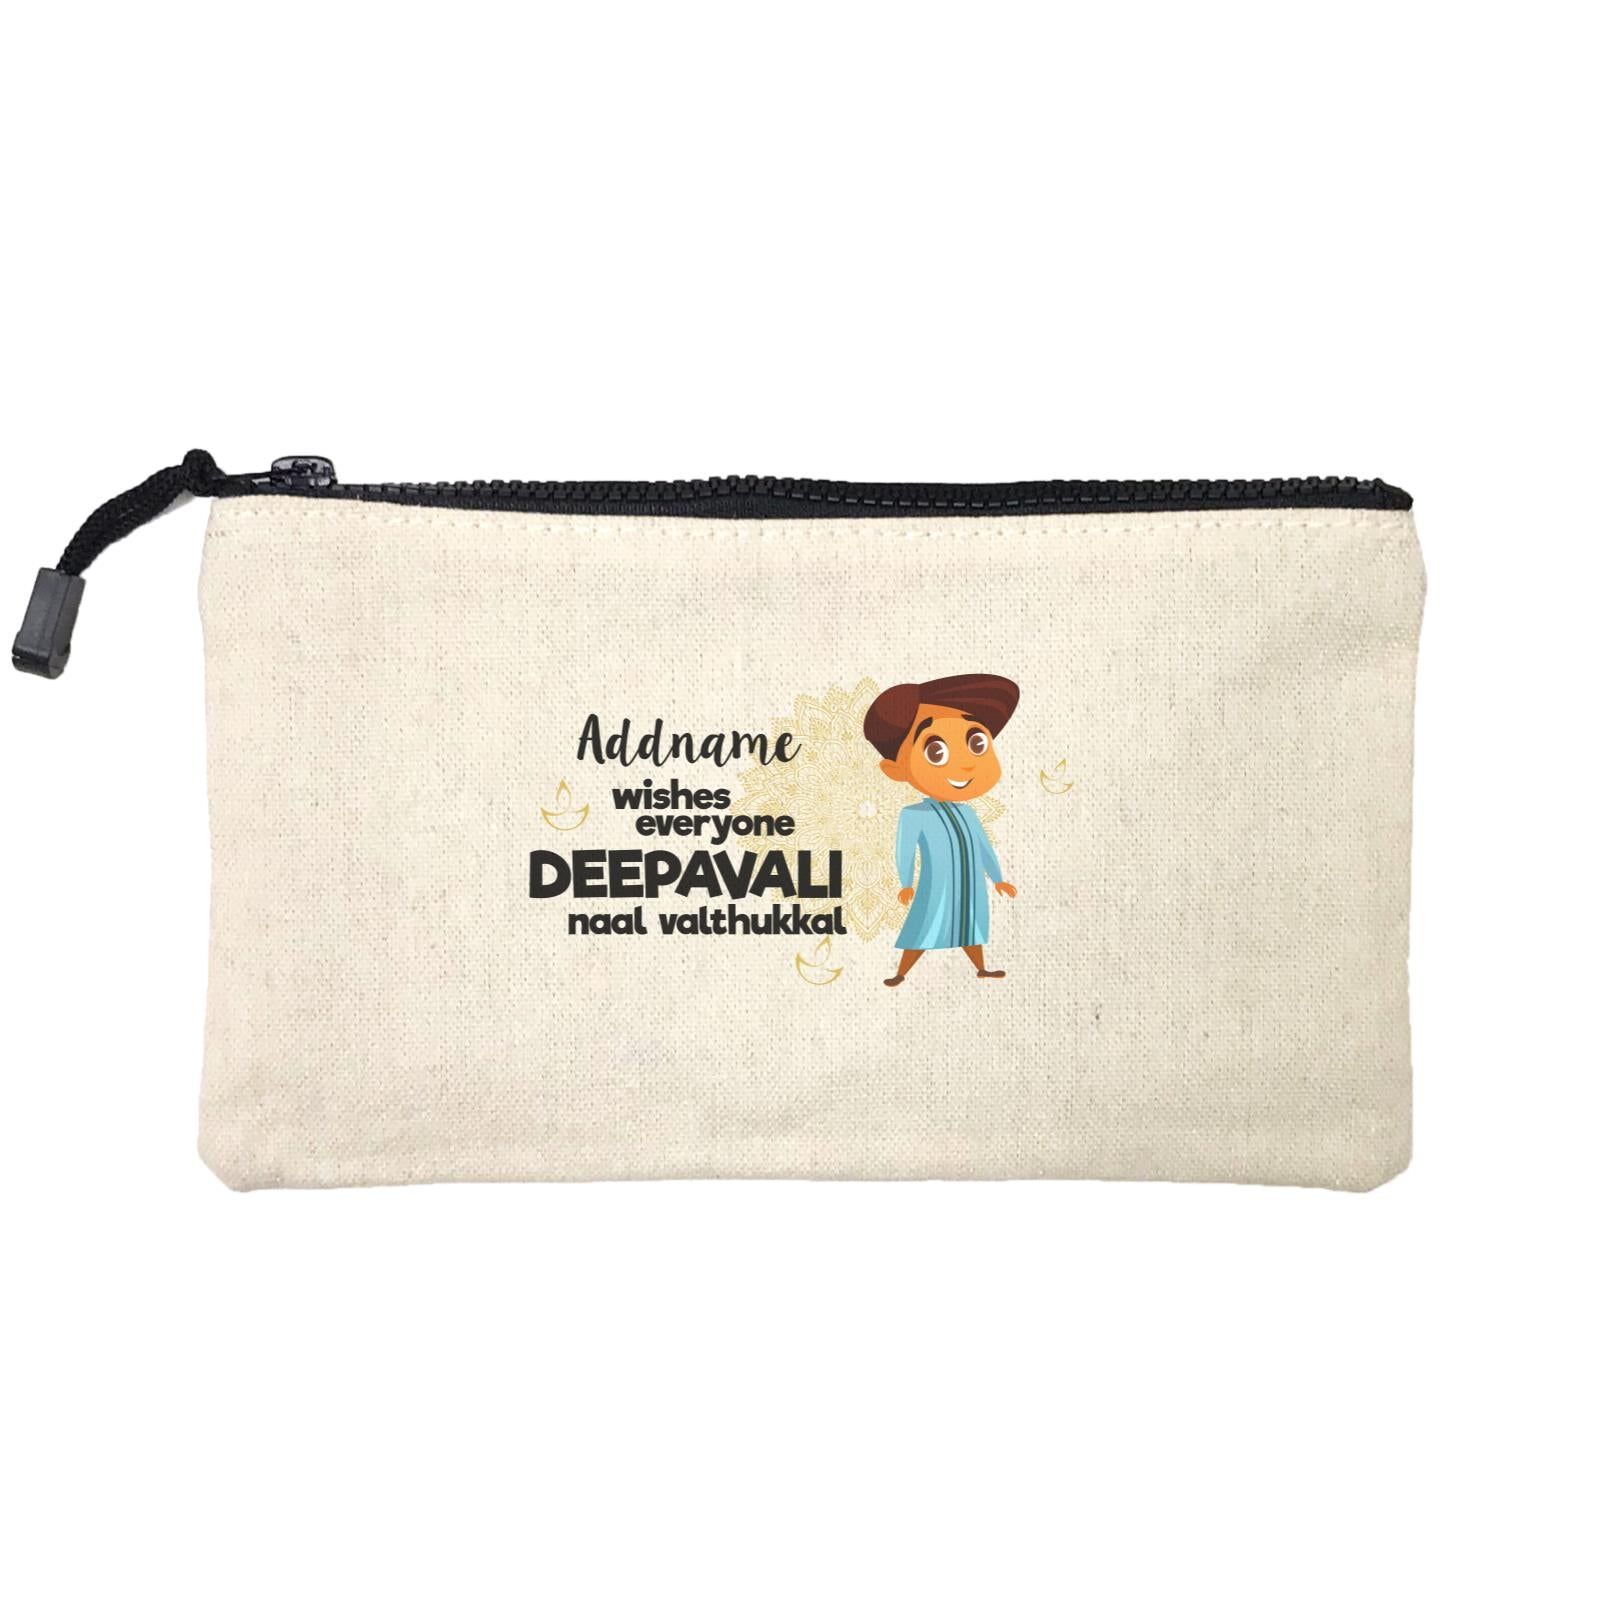 Cute Boy Wishes Everyone Deepavali Addname Mini Accessories Stationery Pouch